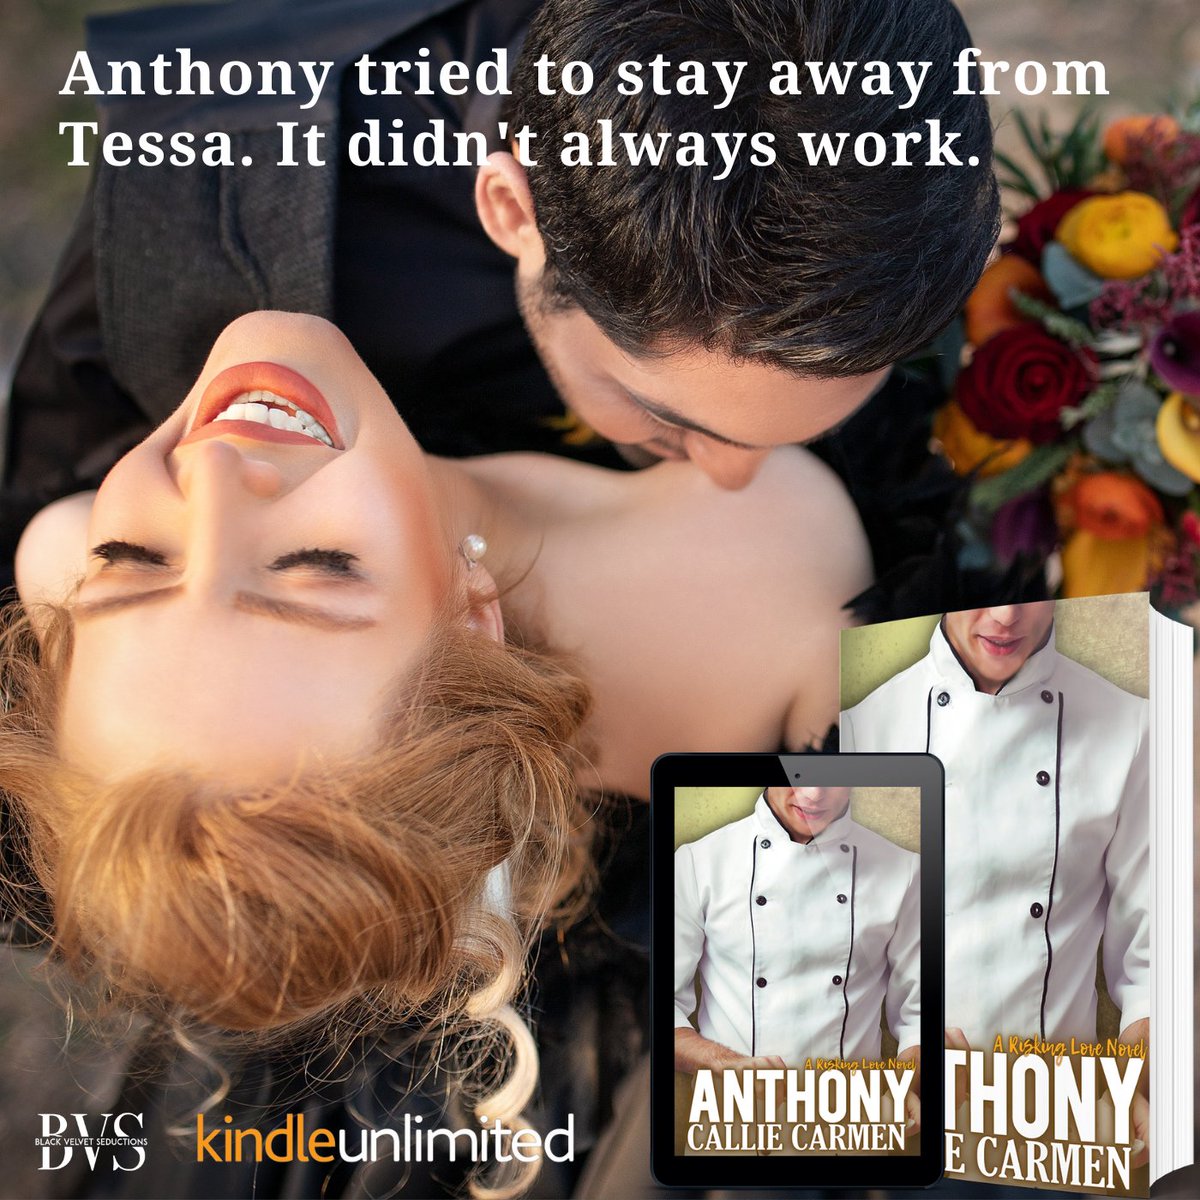 If only Tess could make Anthony understand that she was nothing like his ex-wife.

Based on a true story.

Get your copy here: amzn.to/2Pxyavu

#Romance #KindleUnlimited #RomanceReaders #romancebooks #chef #businesswoman #WednesdayMotivation #Wednesday #BasedOnTrueEvents